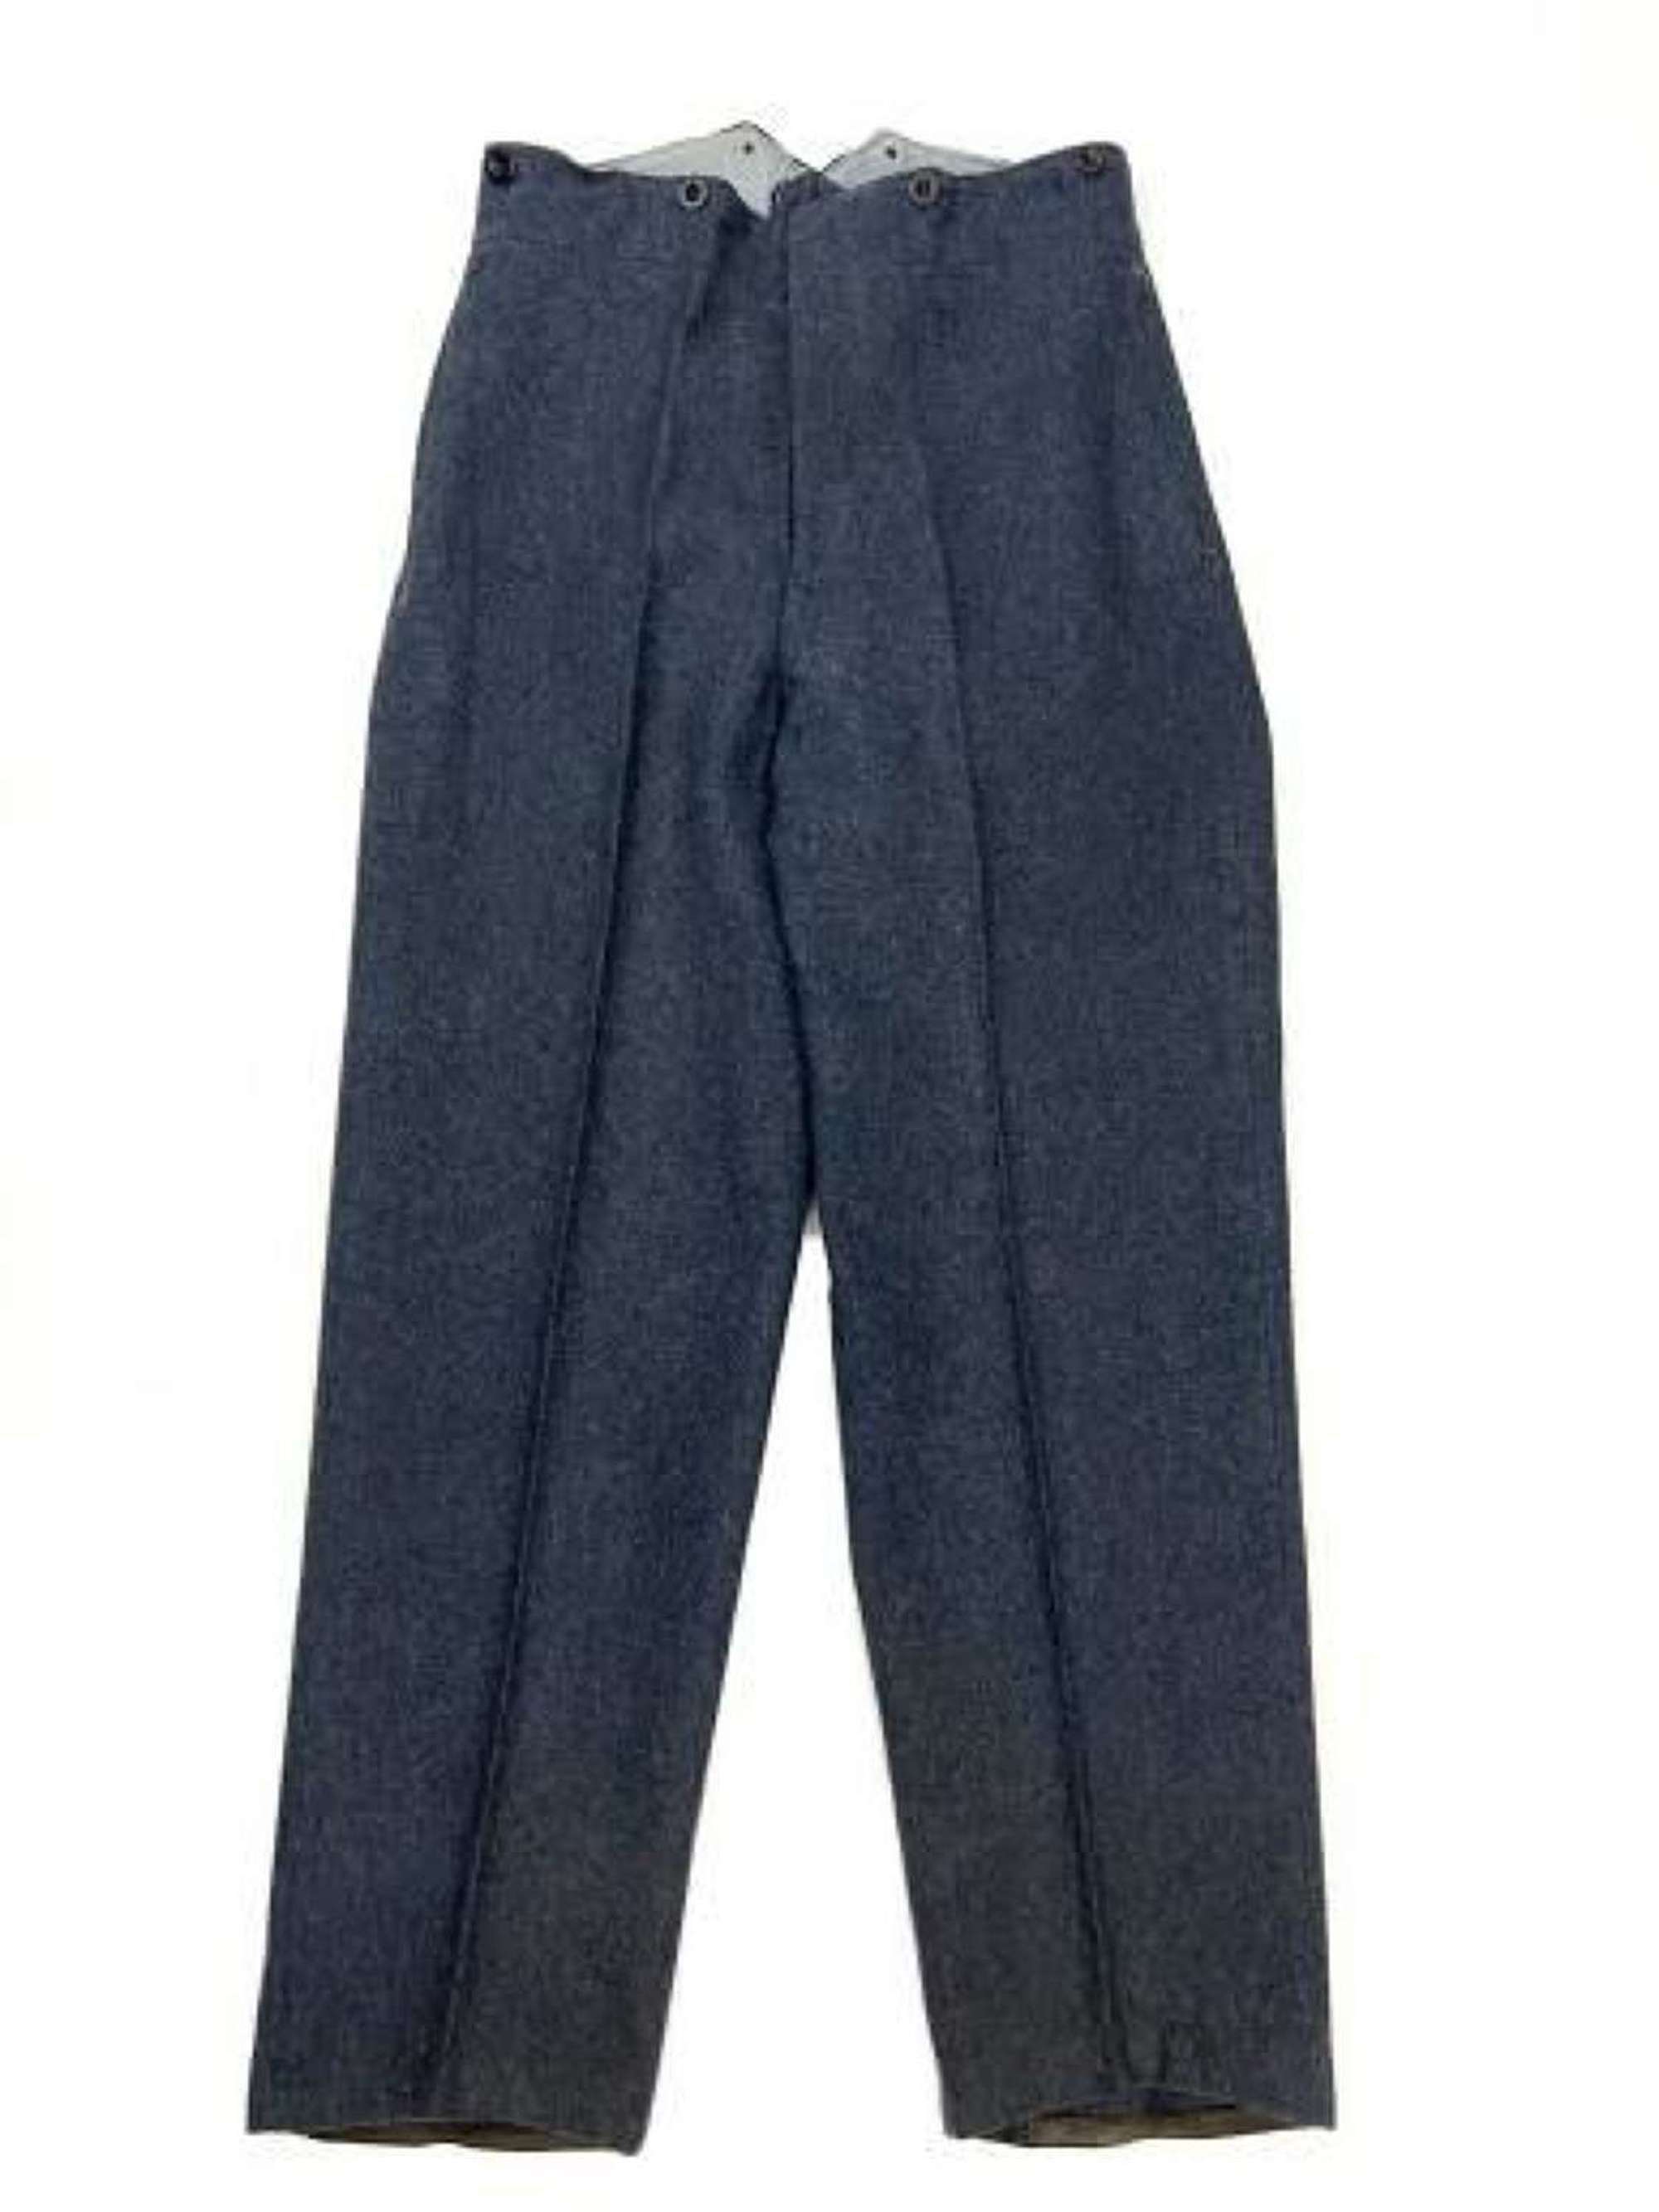 Original 1951 Dated RAF Ordinary Airman’s Trousers - Size 17